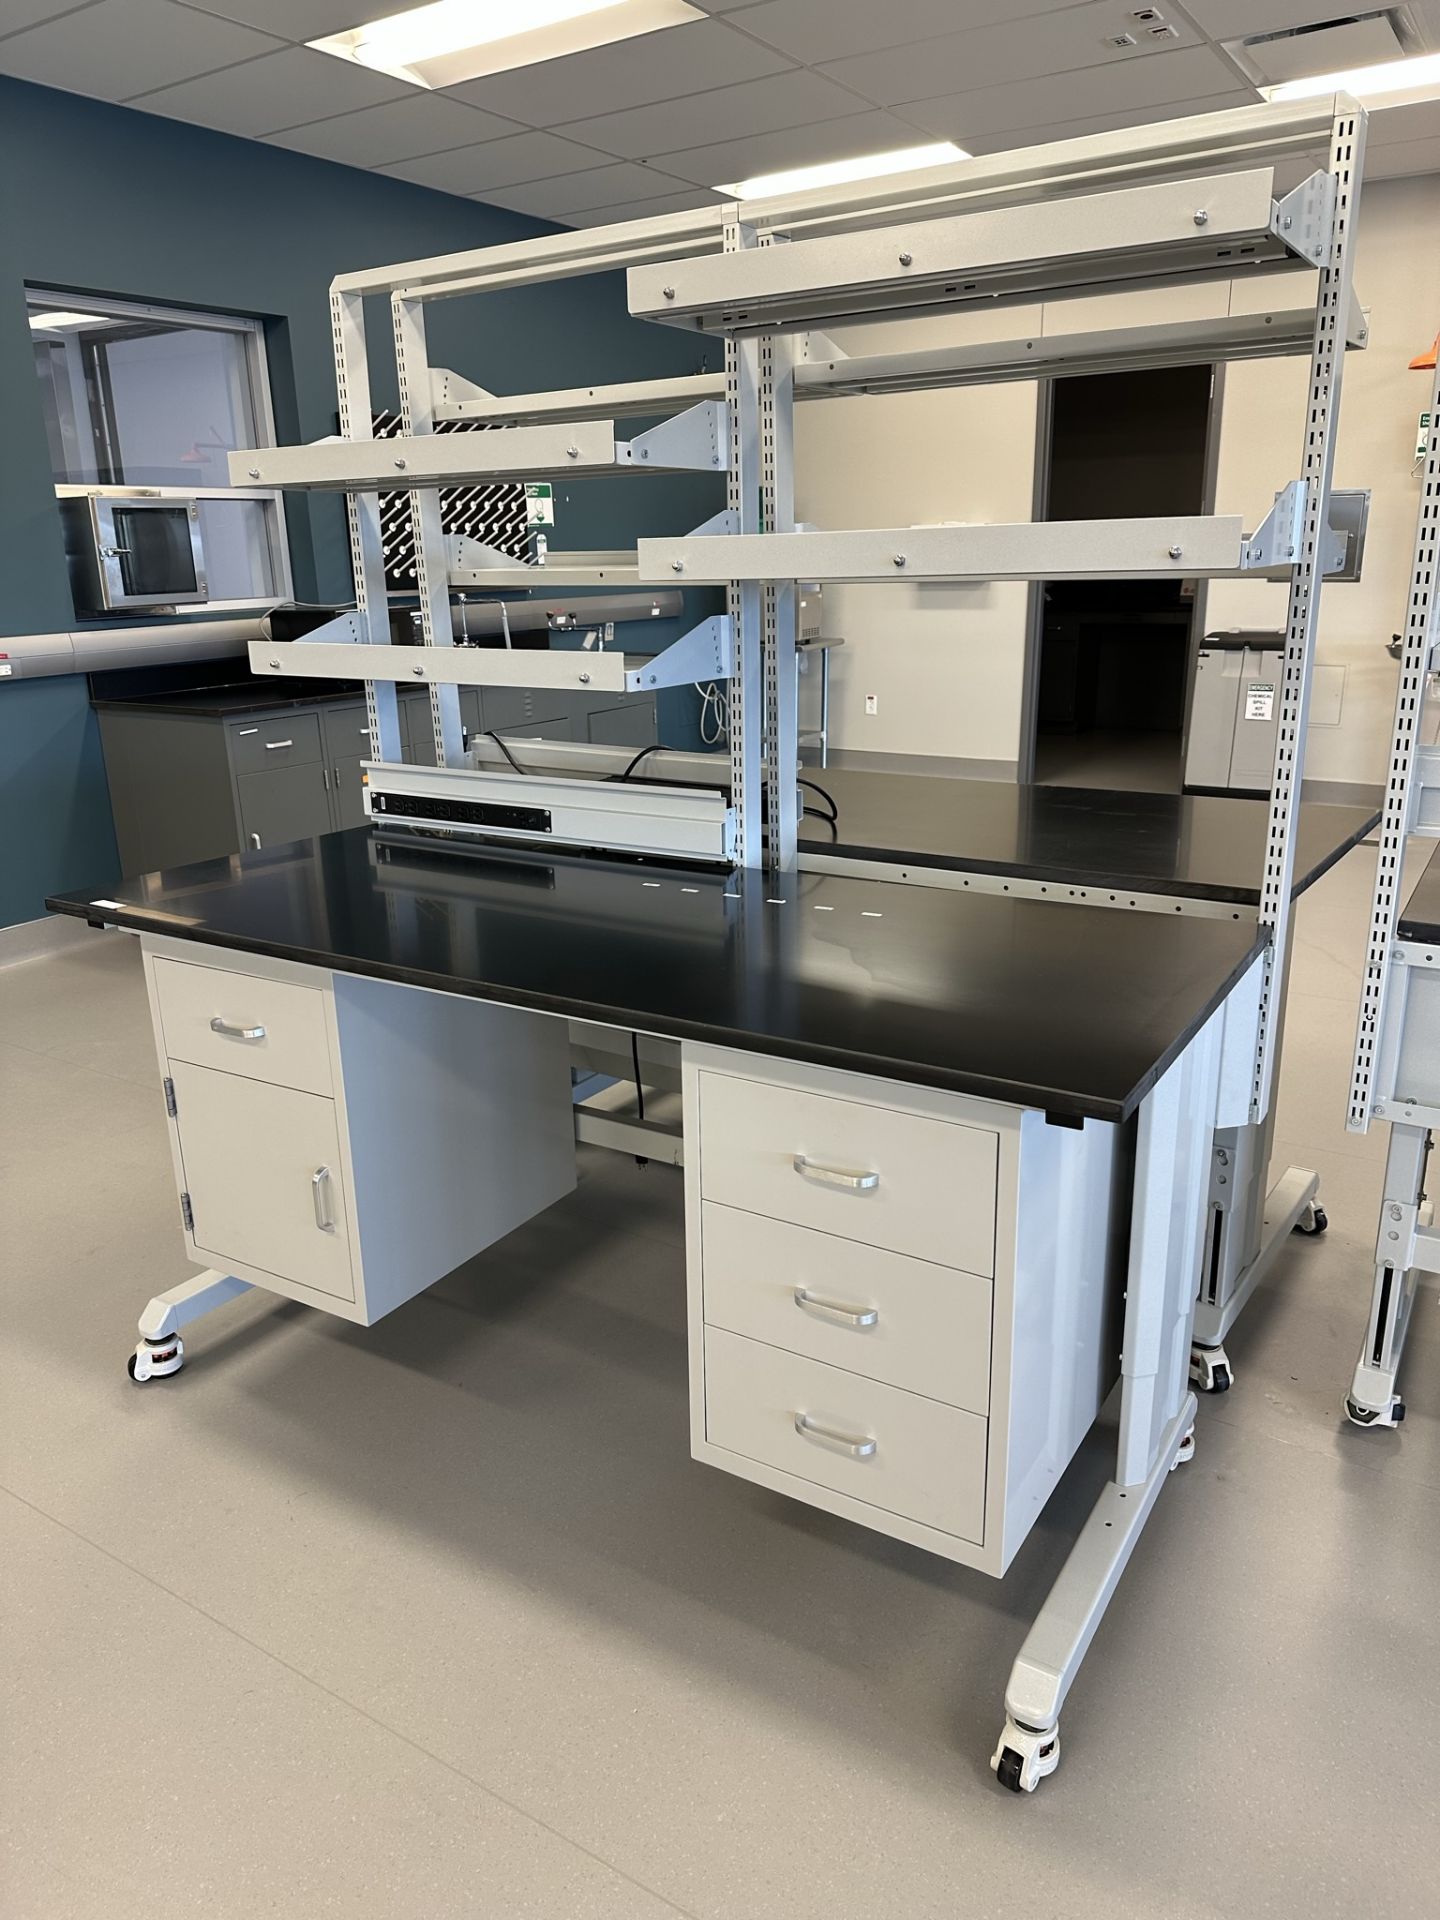 Portable Laboratory Work Bench - Image 2 of 3